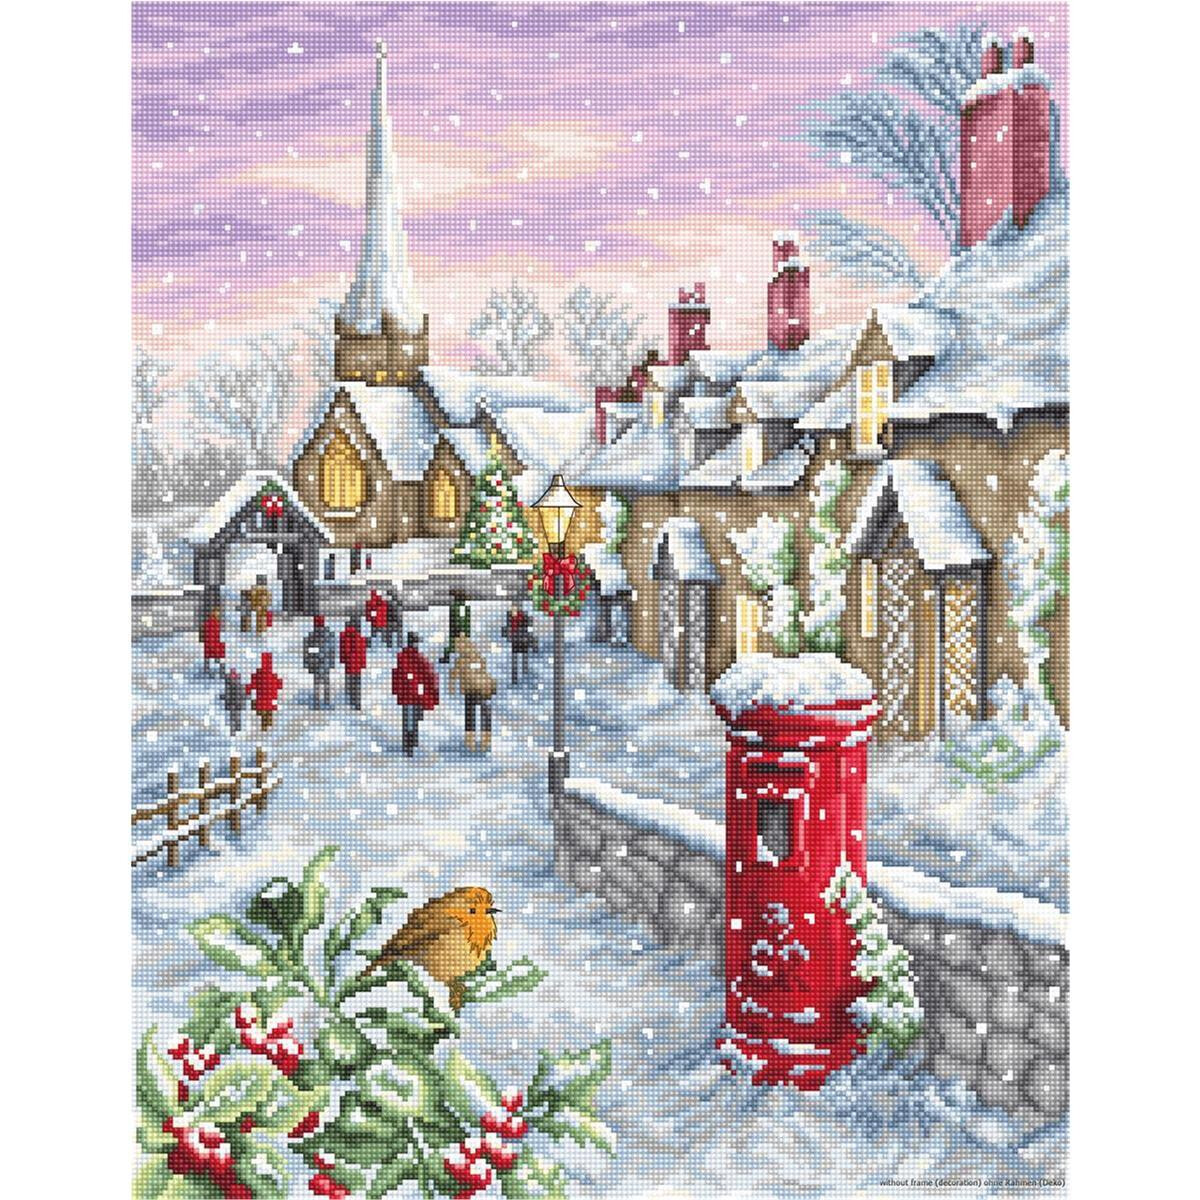 A snowy village scene shows people in winter clothing...